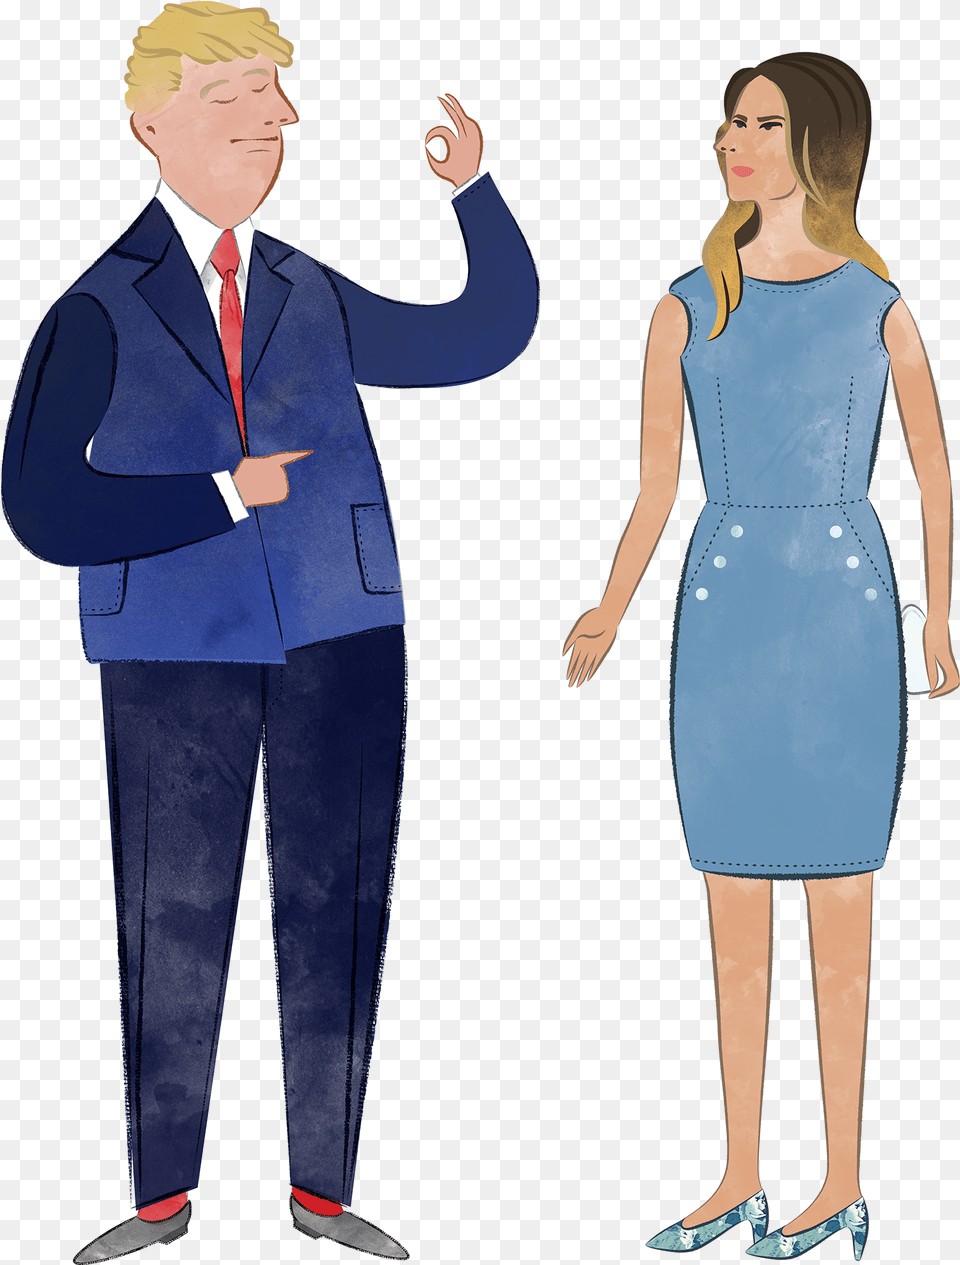 Melania And Donald Trump Illustration Standing, Clothing, Suit, Dress, Formal Wear Png